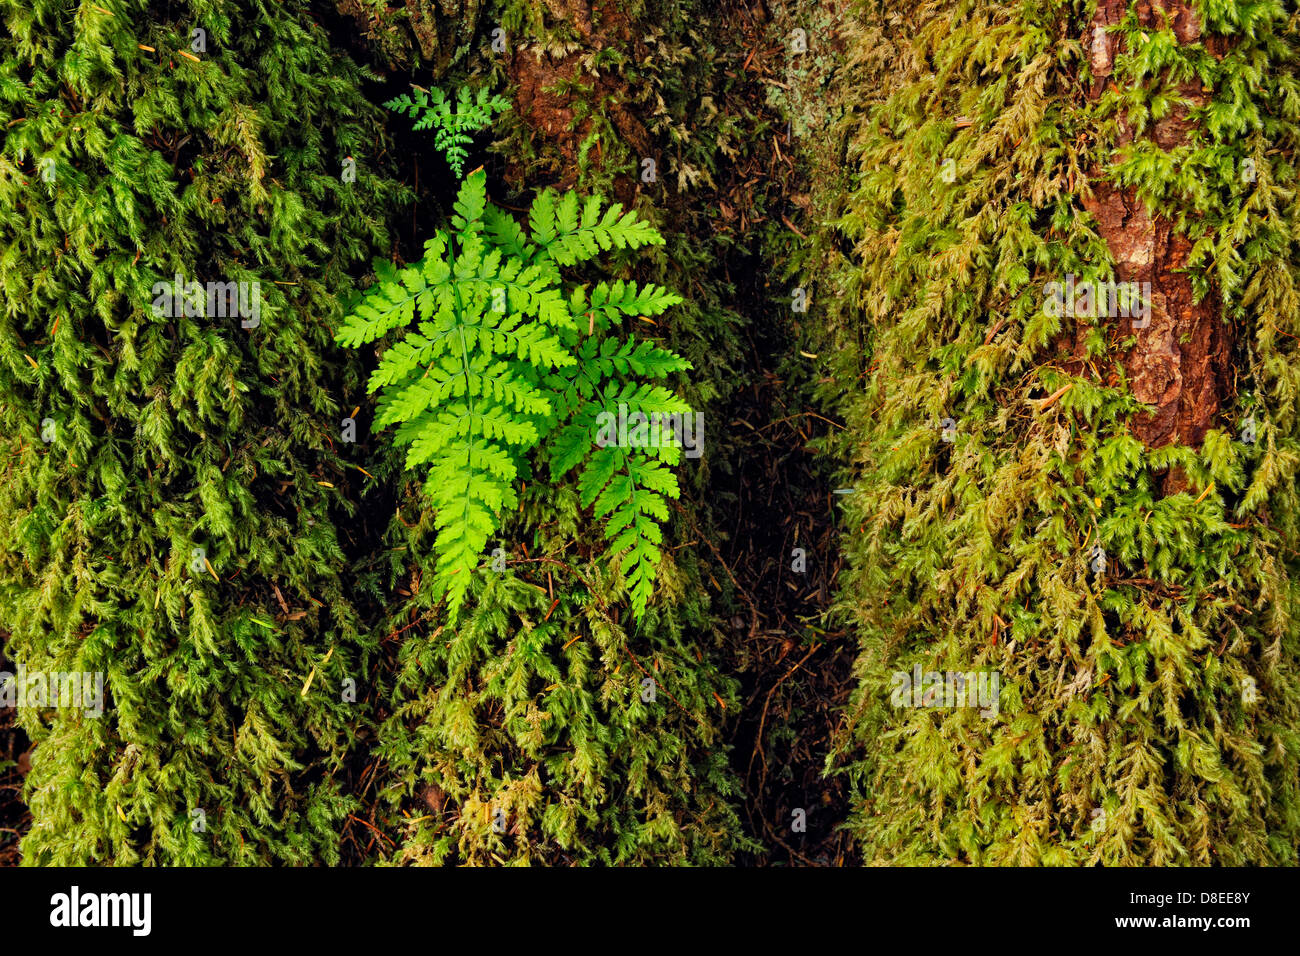 Ferns and mosses on a sitka spruce tree trunk Haida Gwaii, Queen Charlotte Islands, British Columbia, Canada Stock Photo